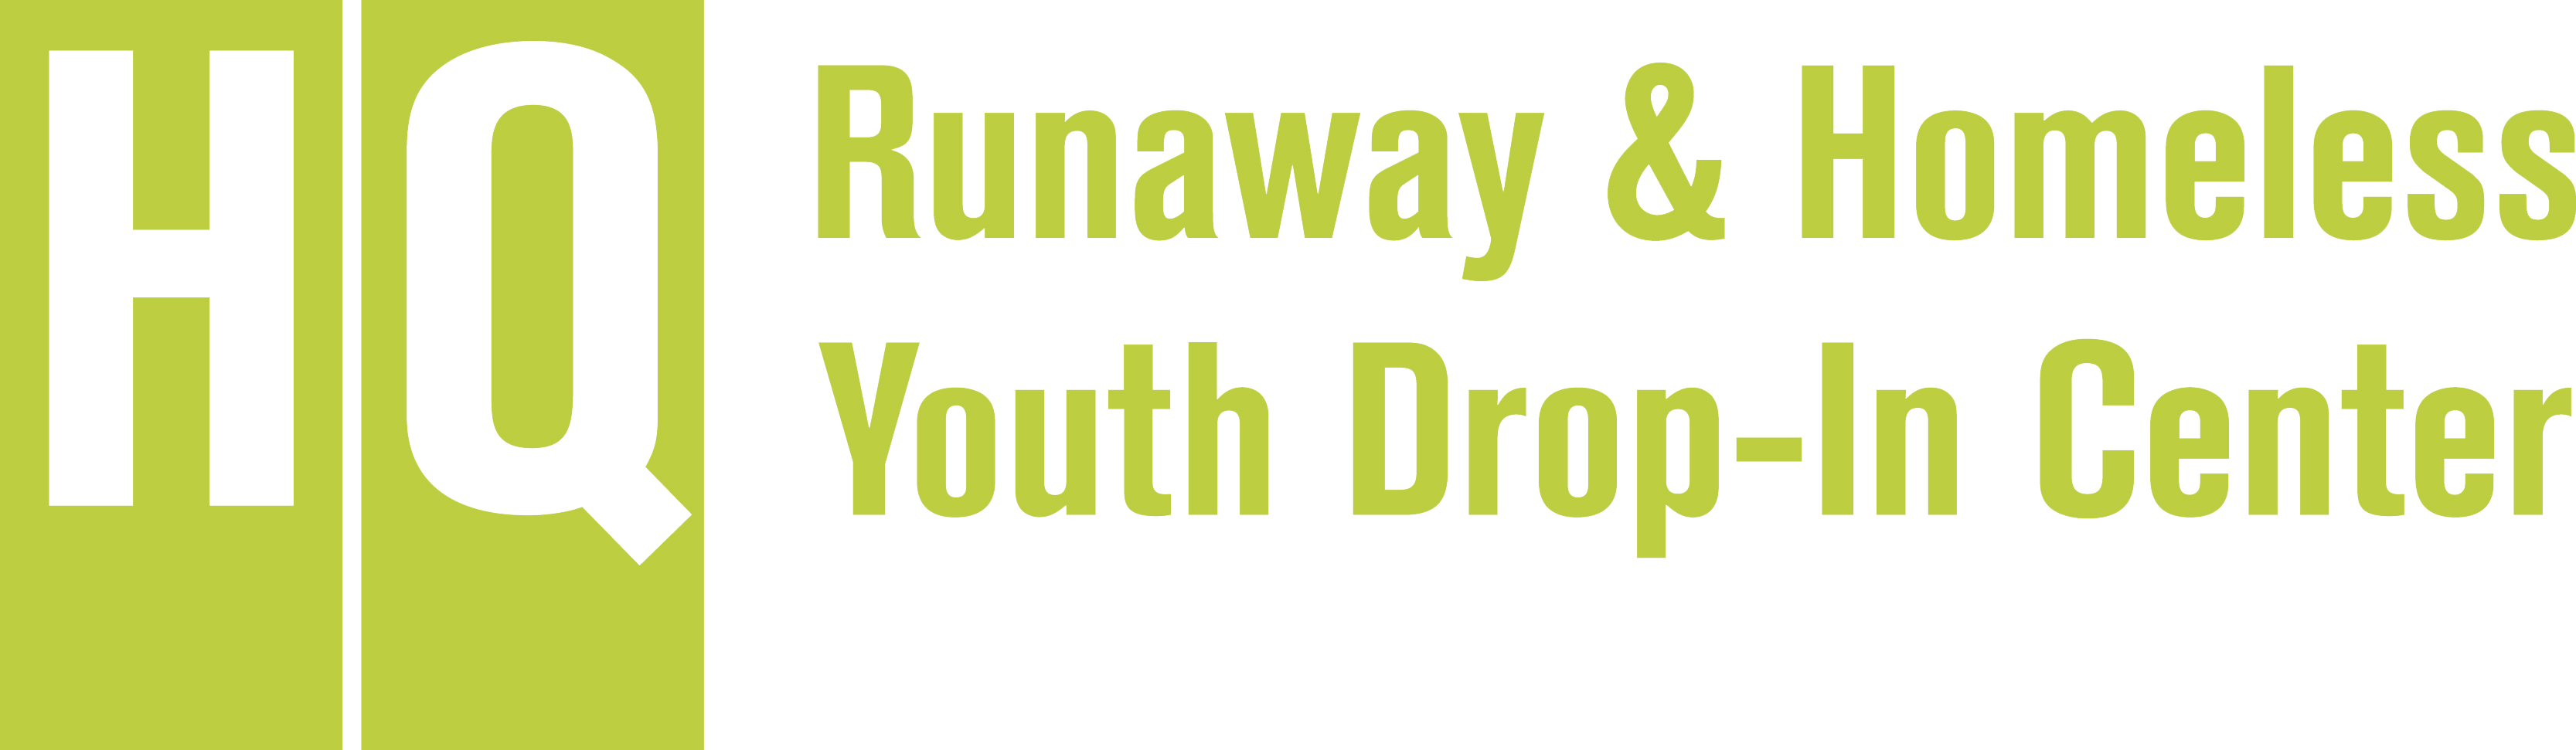 HQ Logo - HQ Runaway & Homeless Youth Drop In Center And Homeless